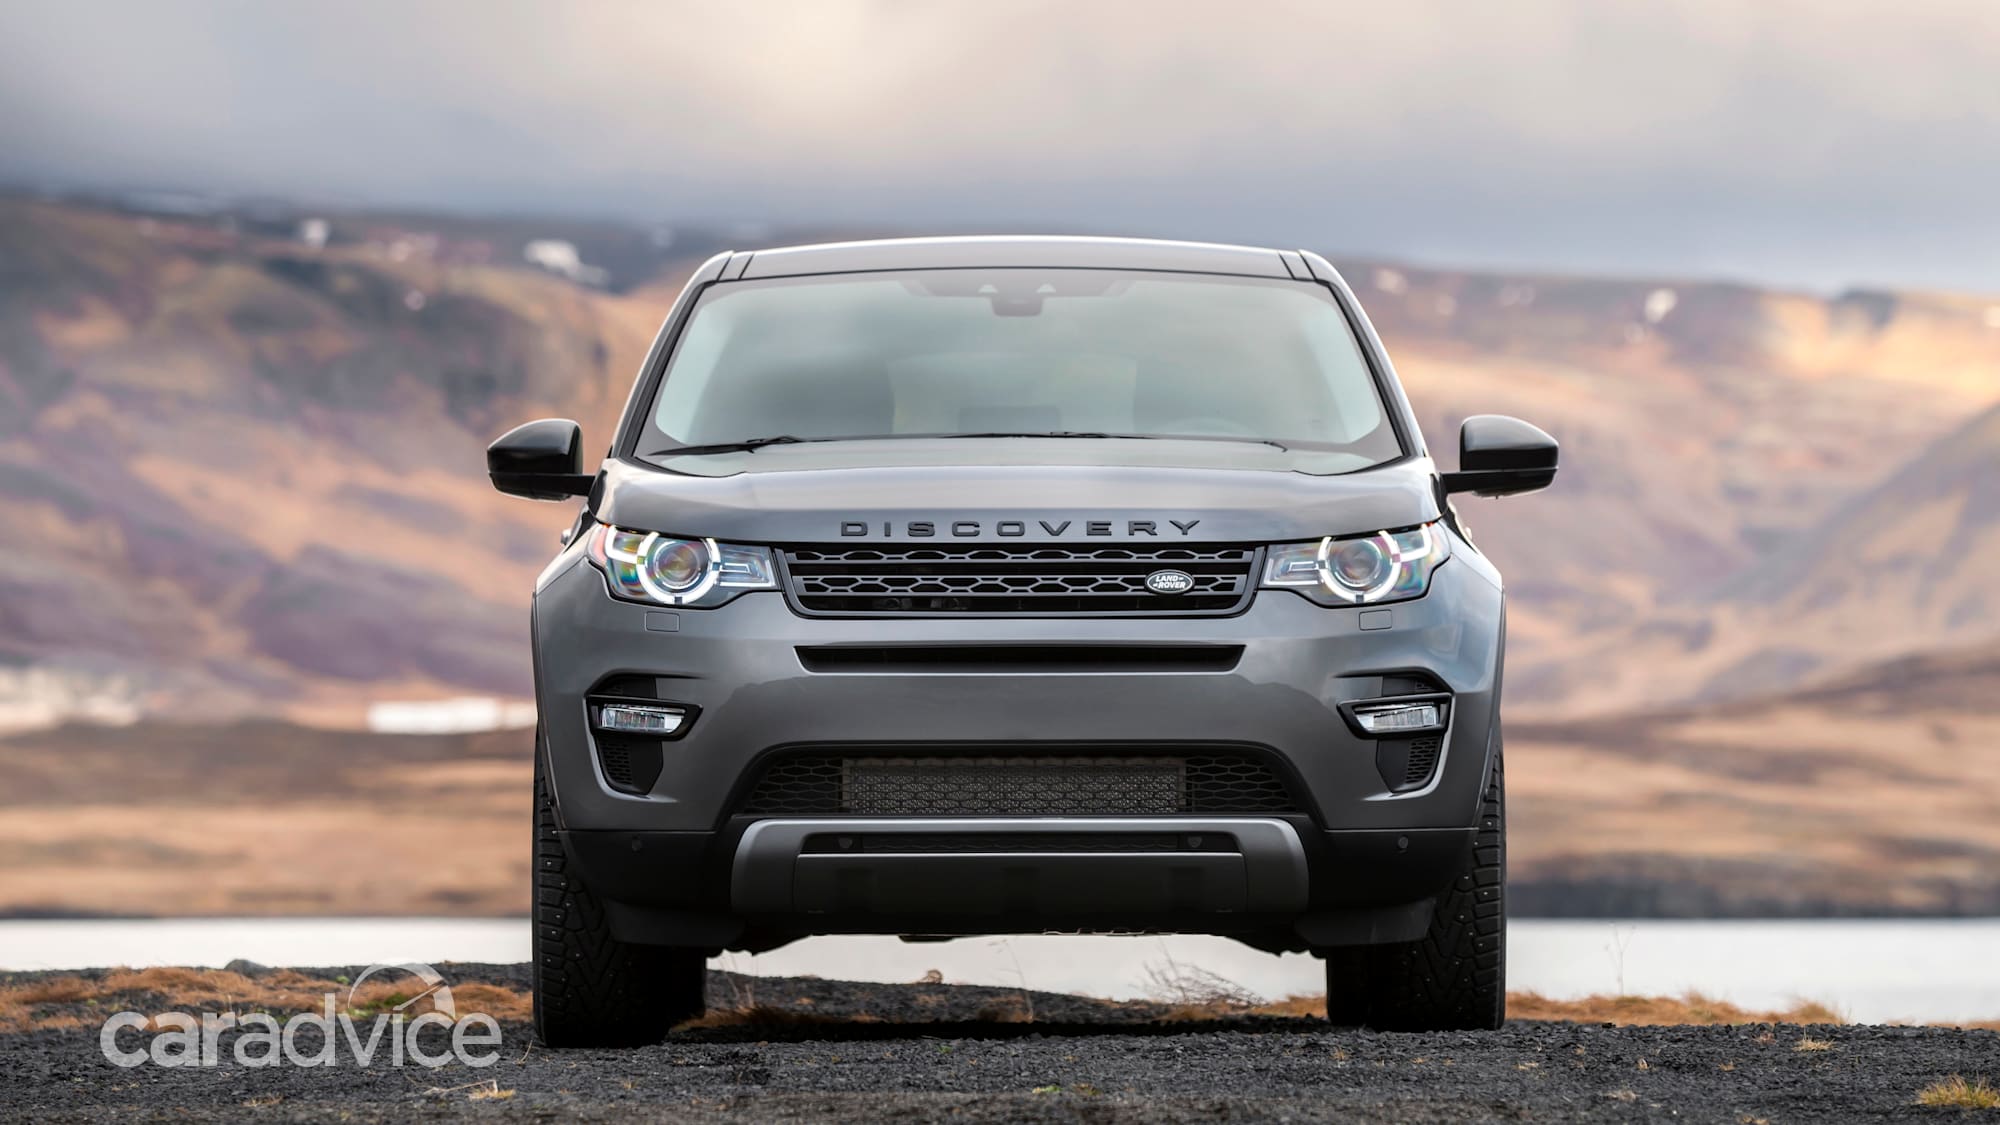 Land Rover Discovery Sport Review | CarAdvice